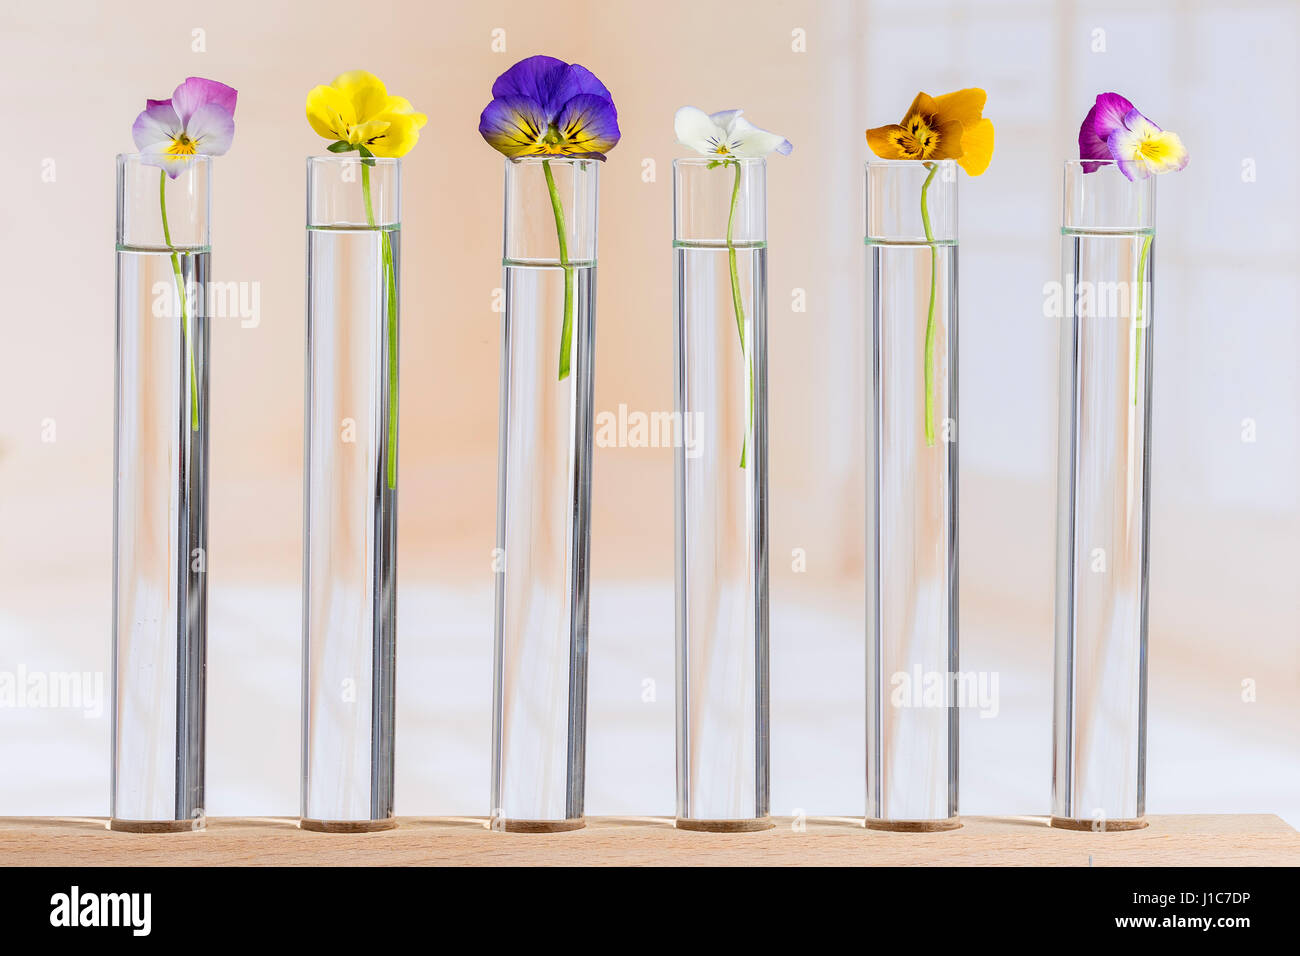 nice pansies,essential oil in glass test tubes Stock Photo